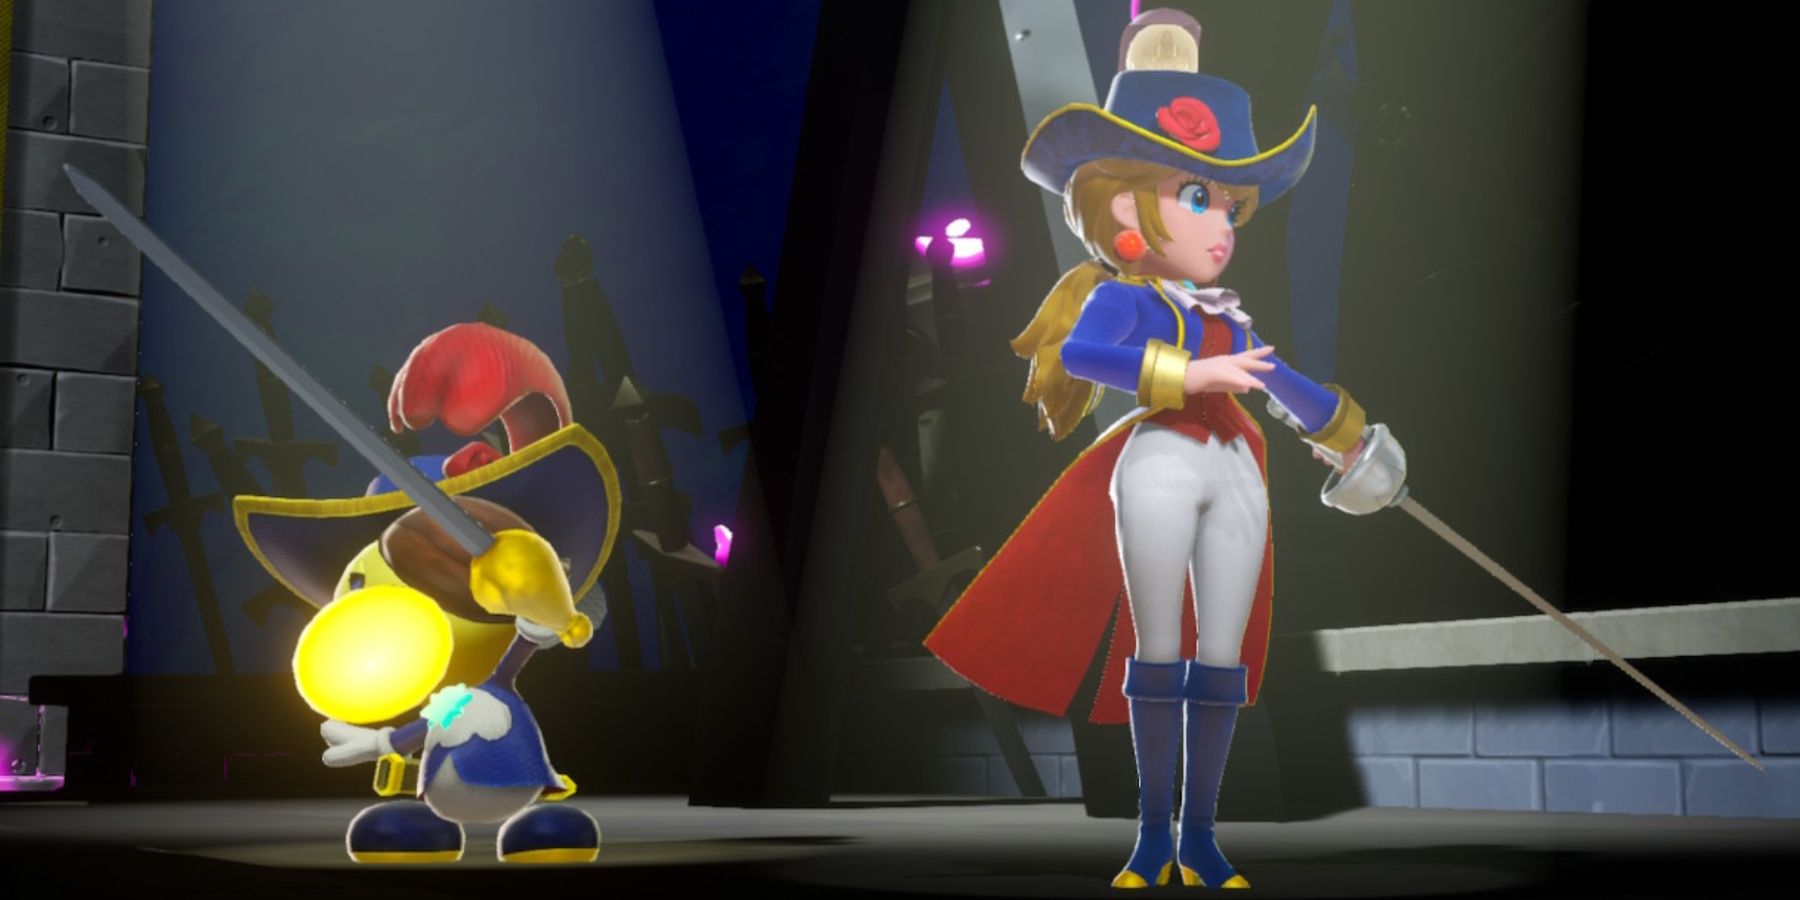 peach and swordfighter sparkla posing at the end of a level